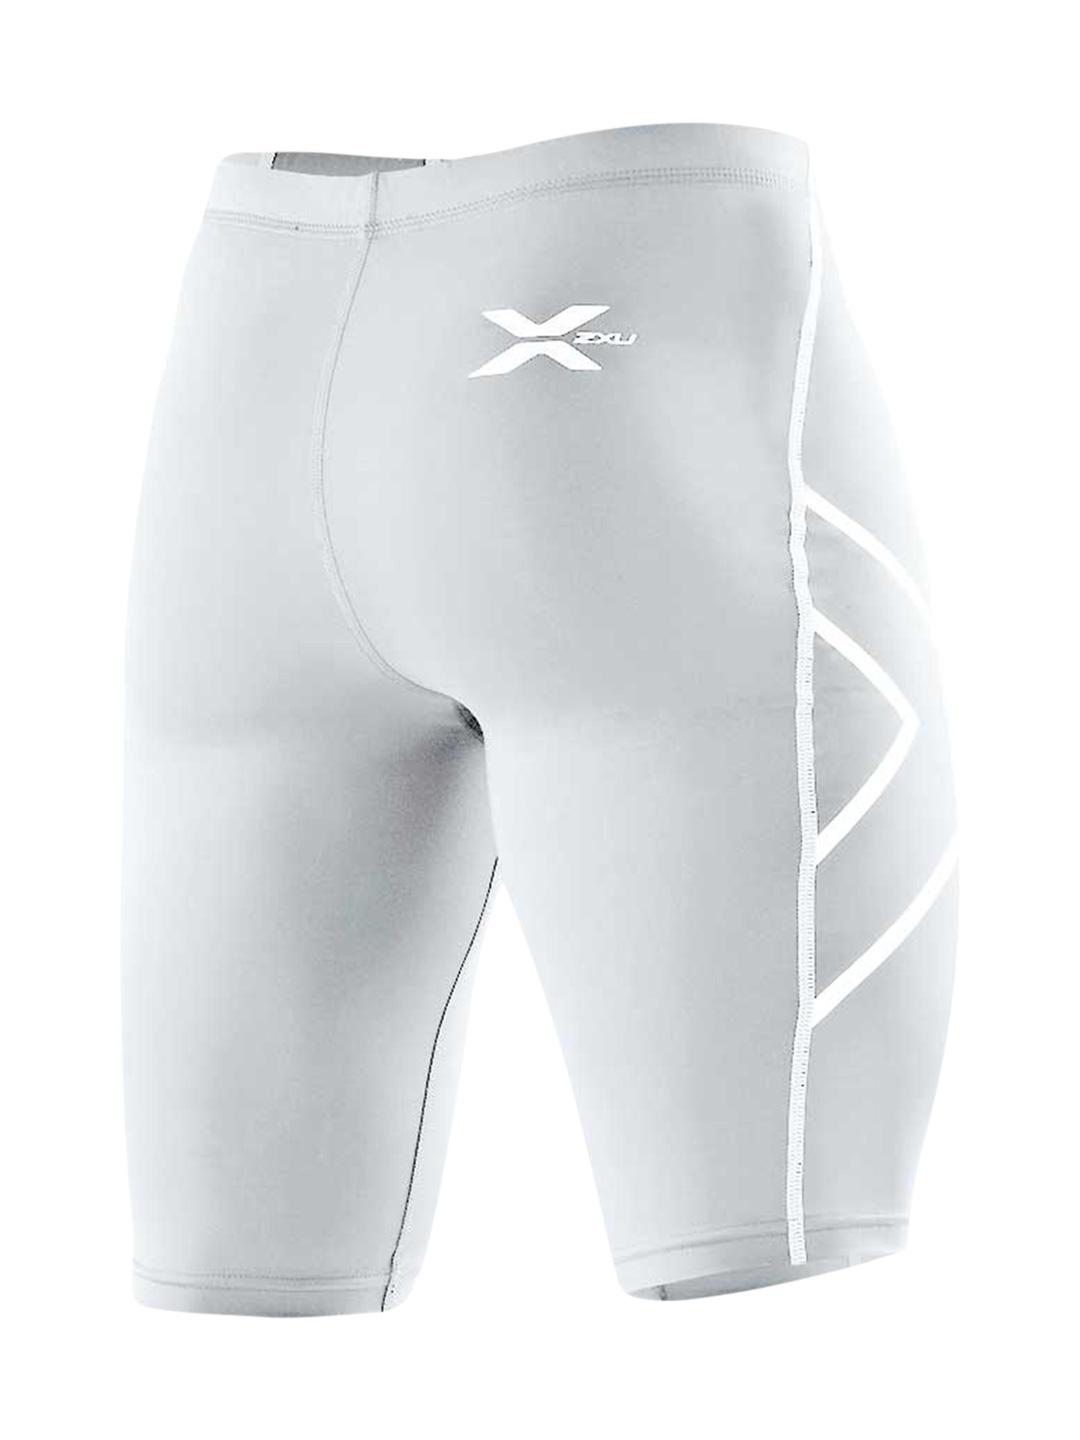 2XU Synthetic Compression Shorts in White/White (White) for Men - Lyst